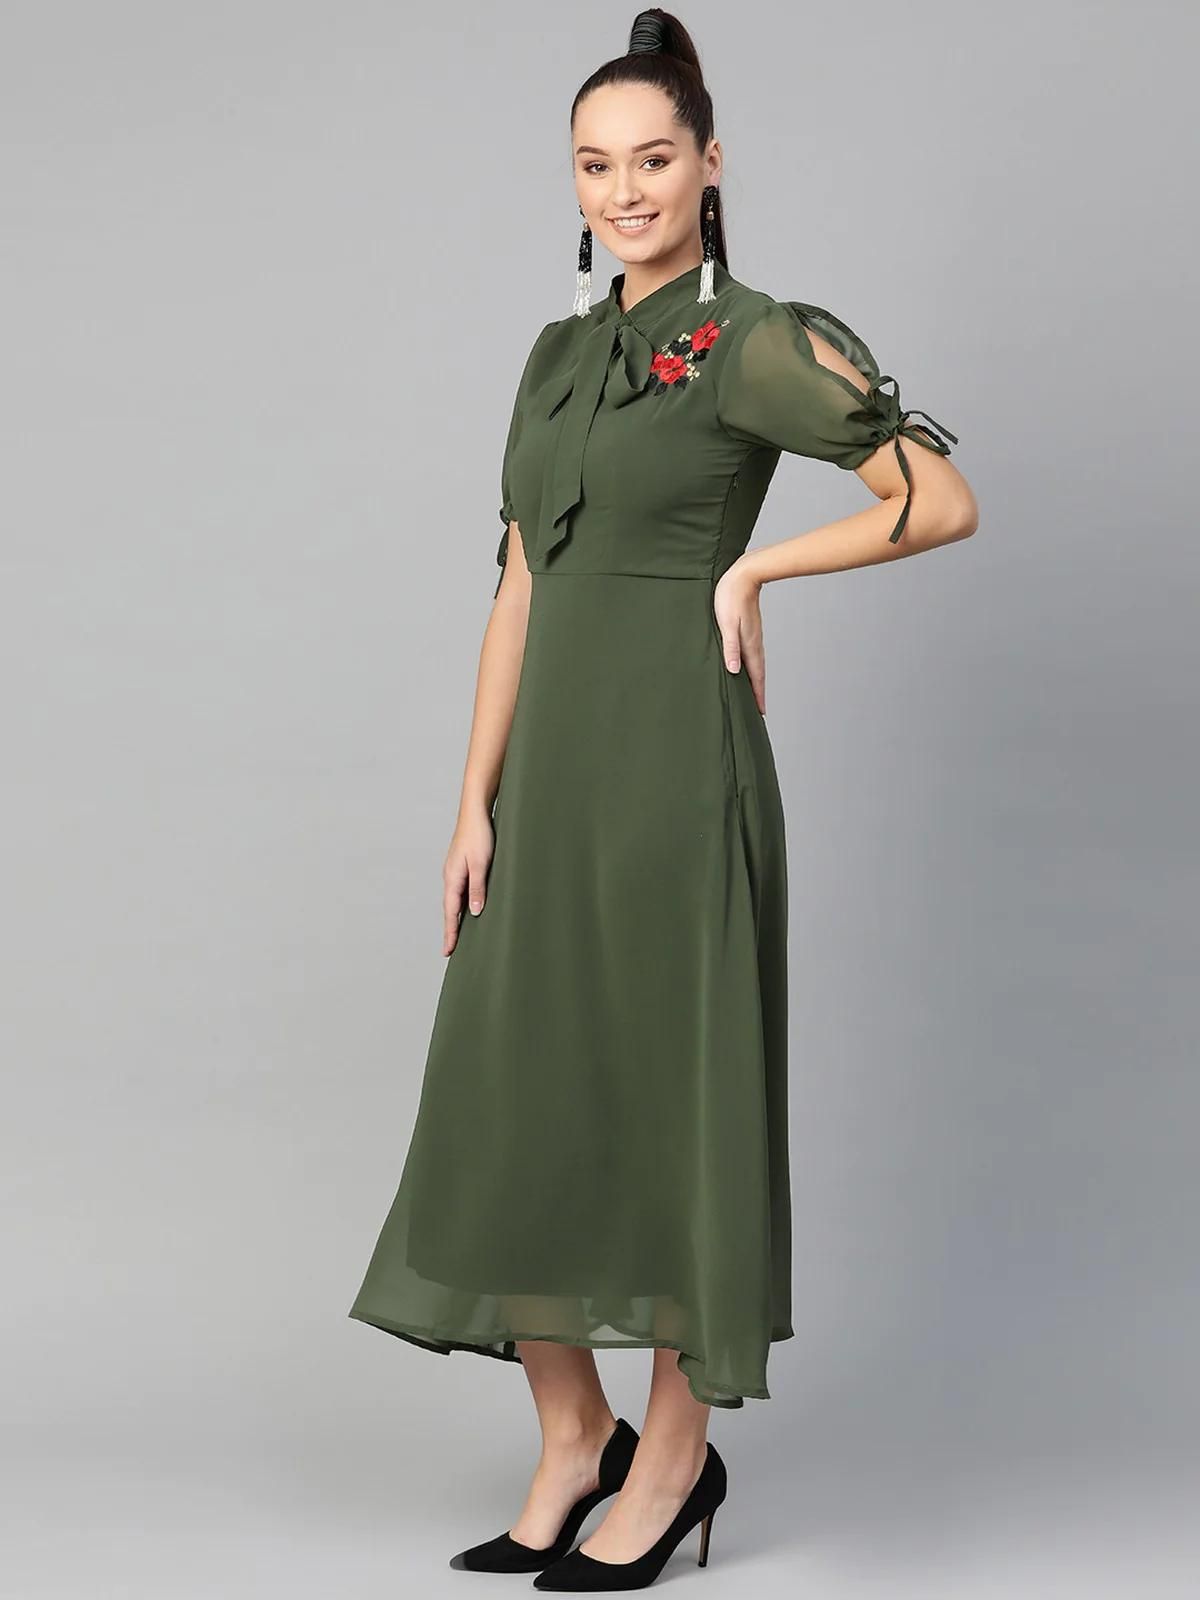 PANNKH Solid Olive Embroidered Maxi Dress With Tie-Up